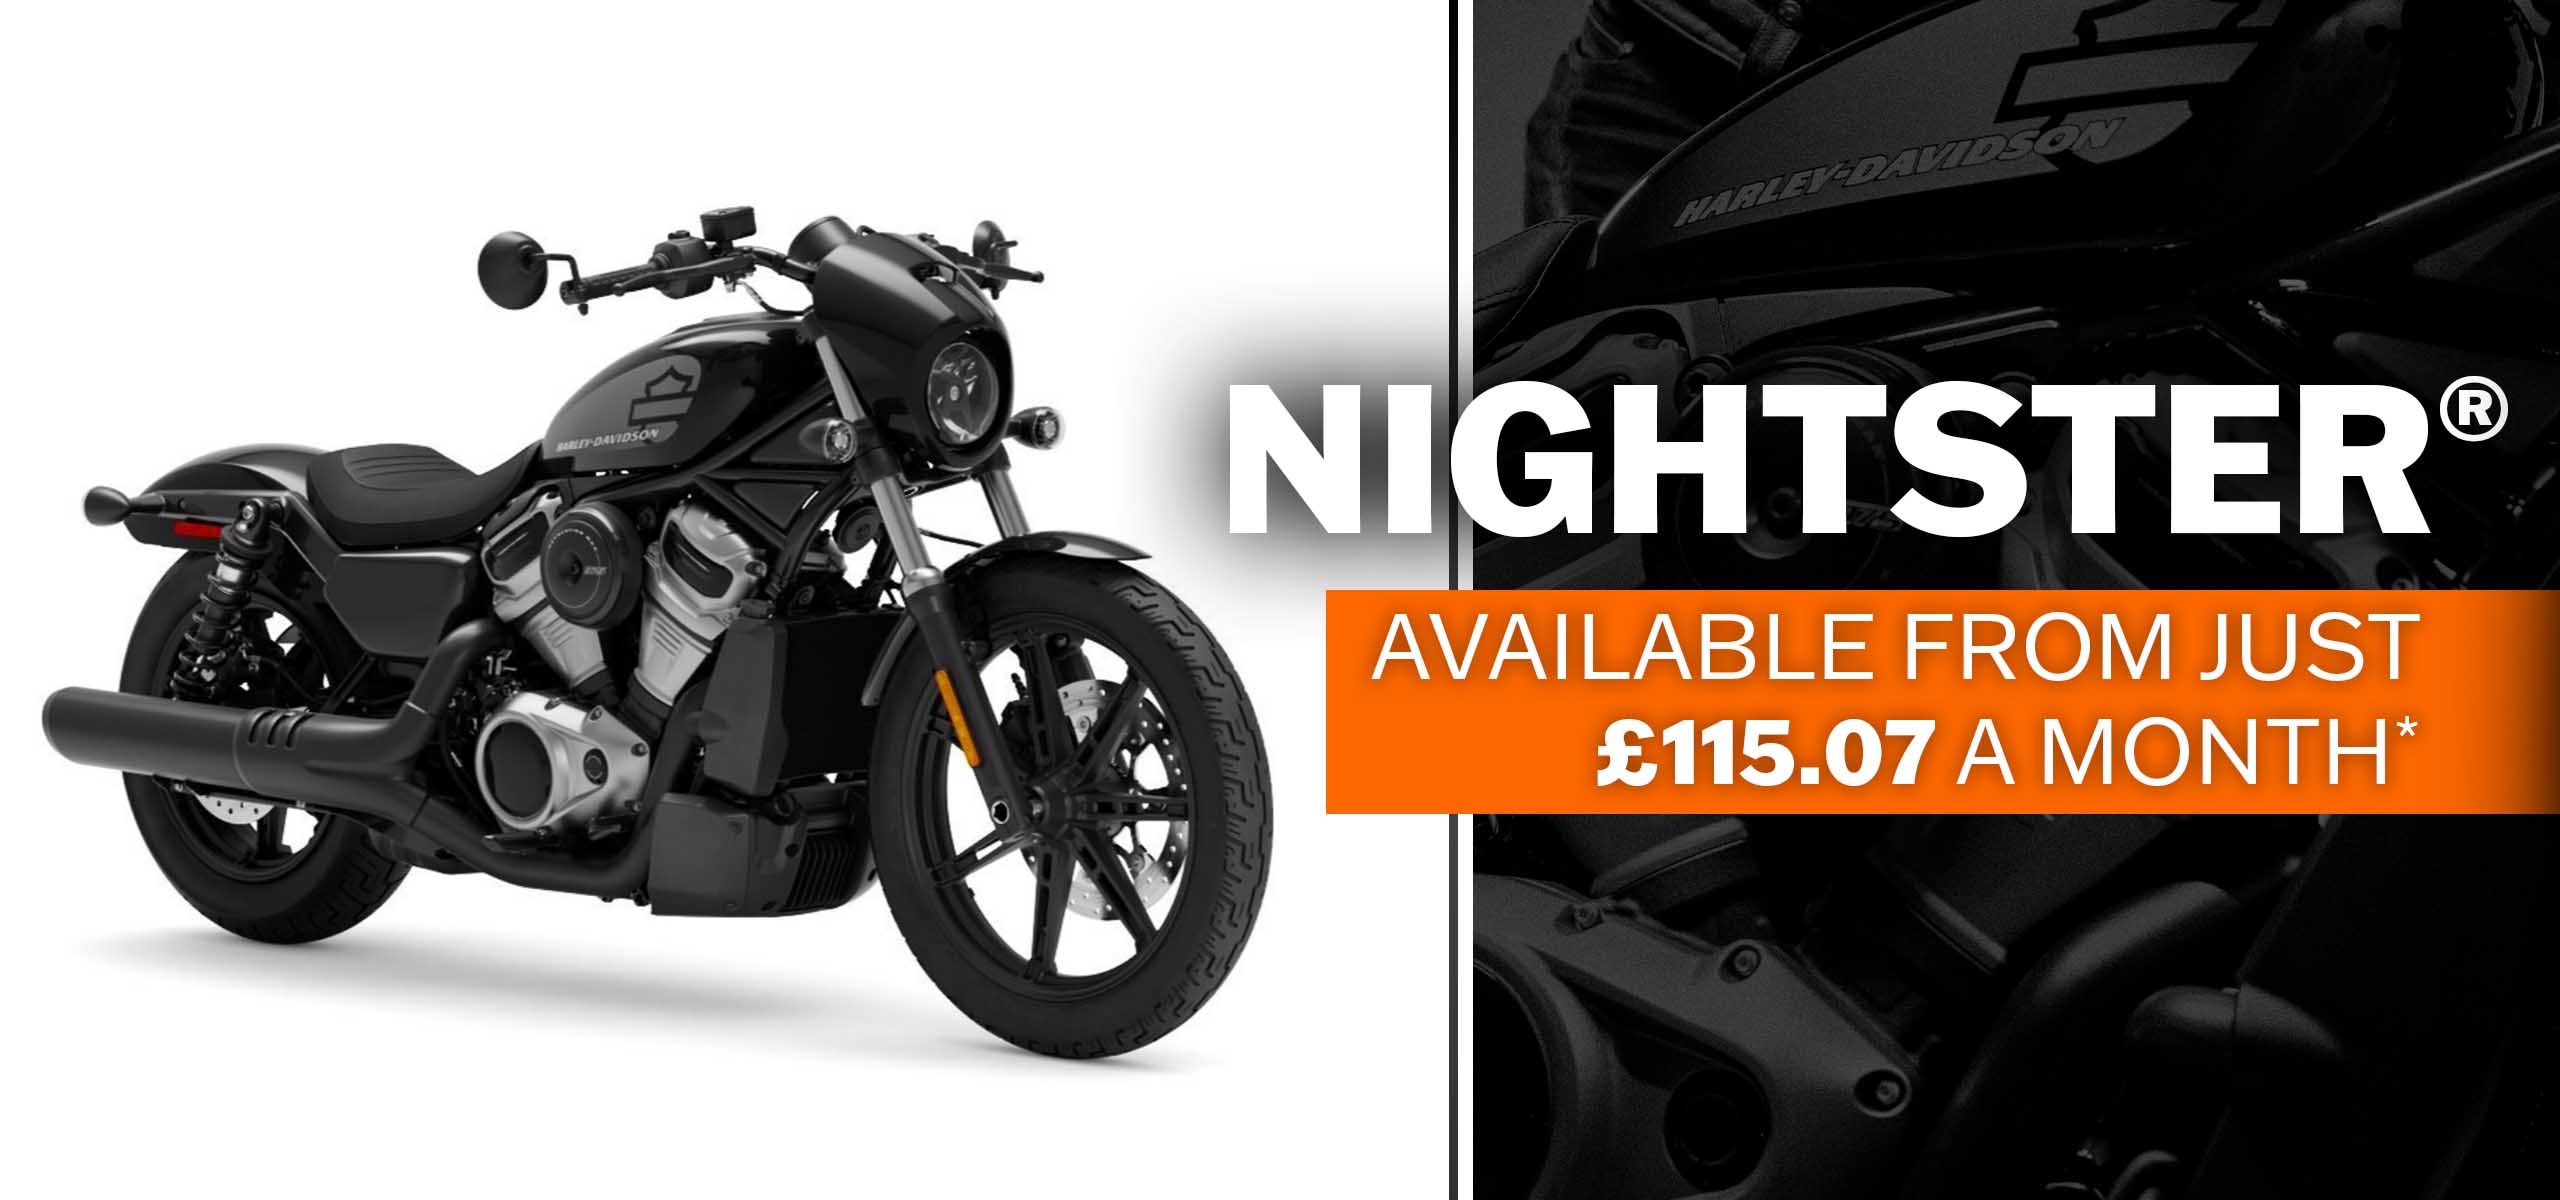 The Nightster is available at Maidstone Harley-Davidson with monthly payments on H-D Finance